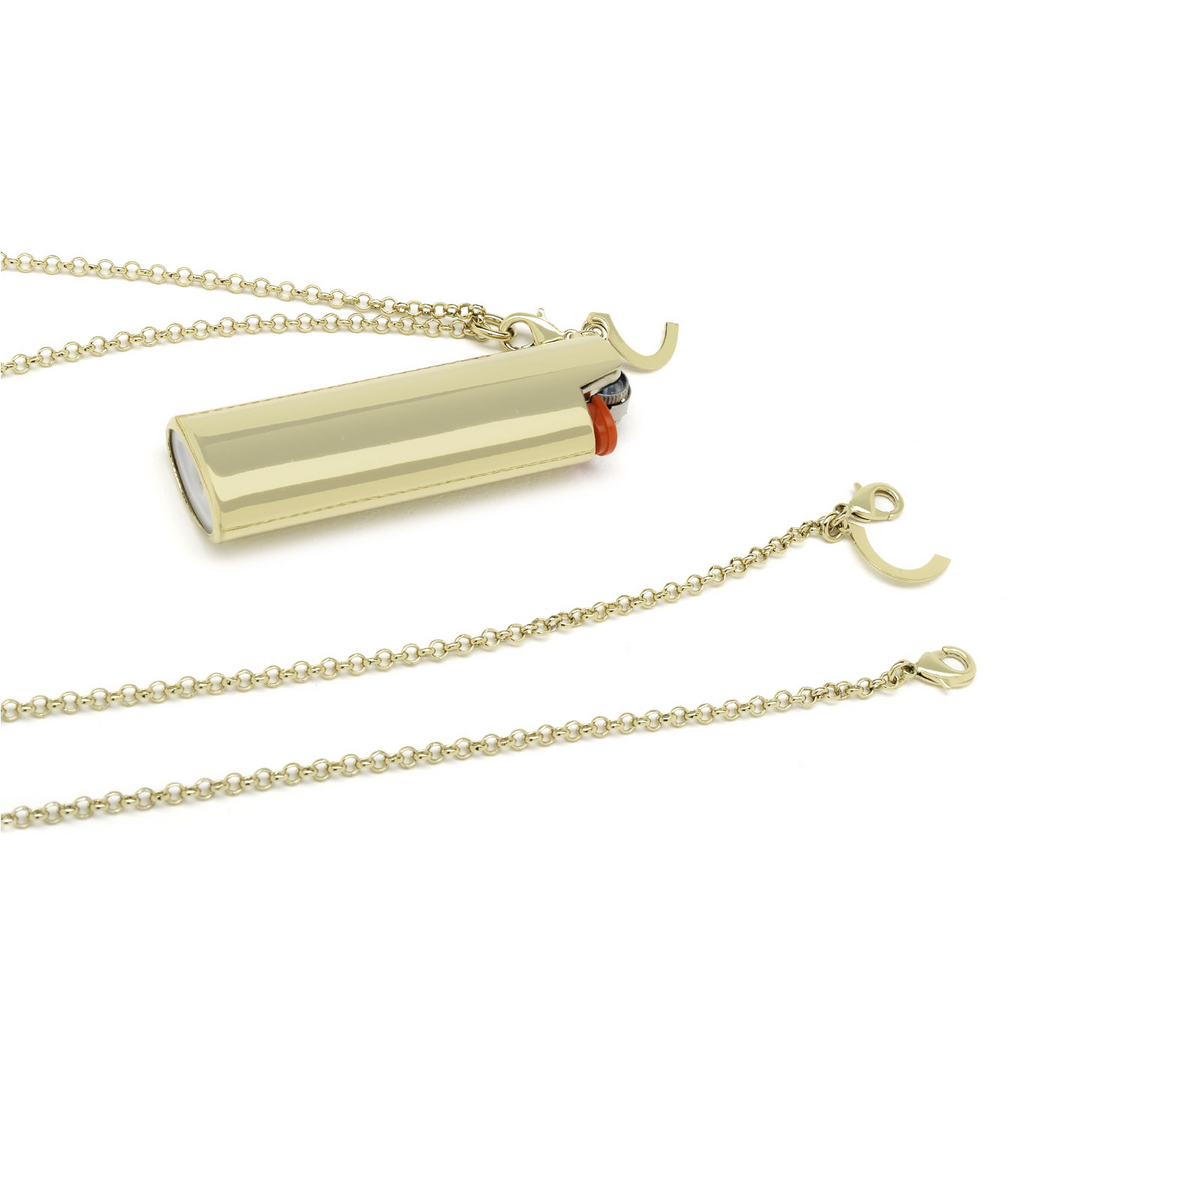 Huma® Accessories: Lighter Holder Charm color Gold Nt - 1/3.